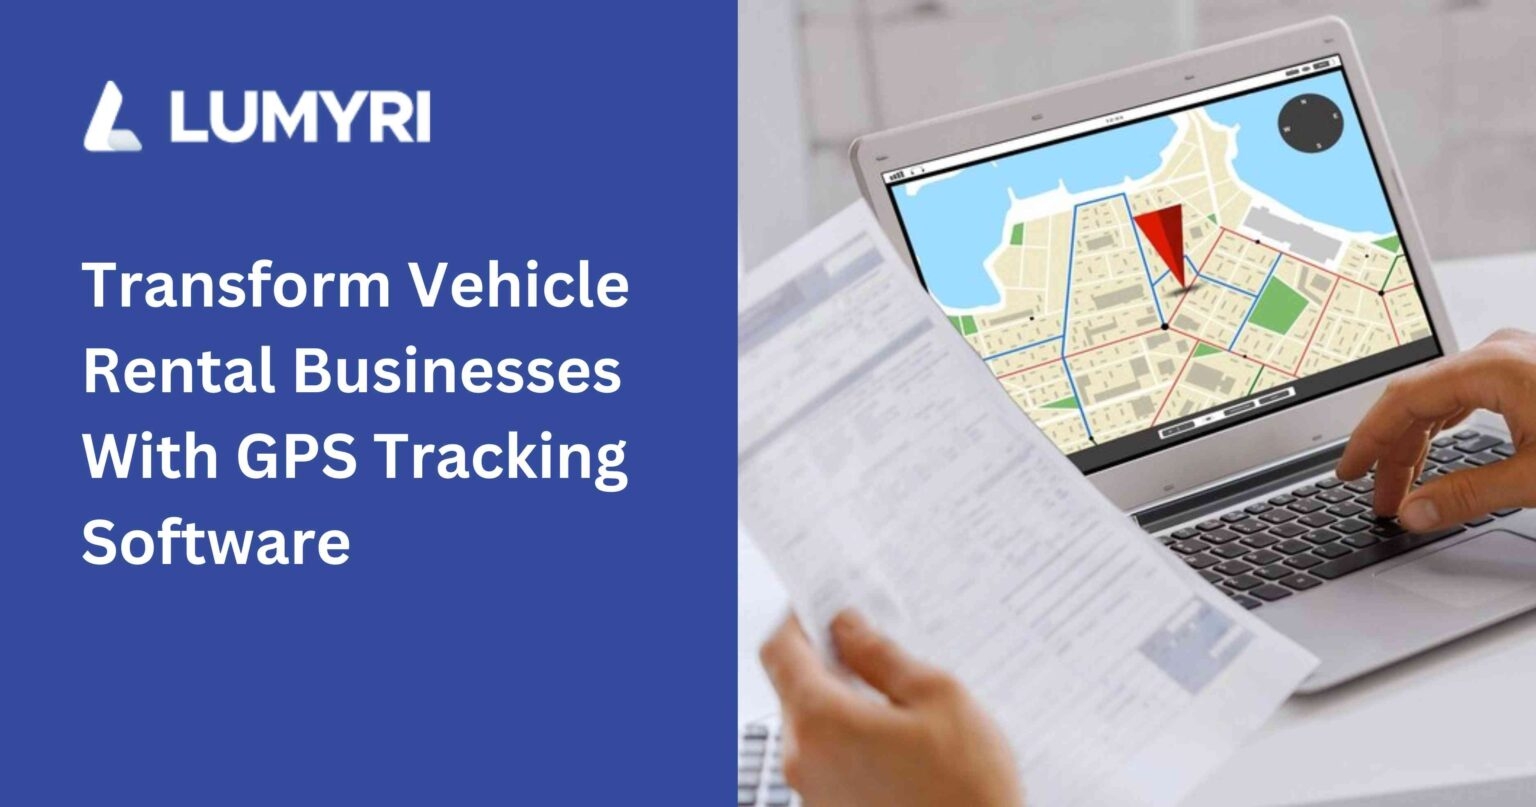 Navigating Success: How the Lumyri GPS Tracking Software Transforms Vehicle Rental Businesses